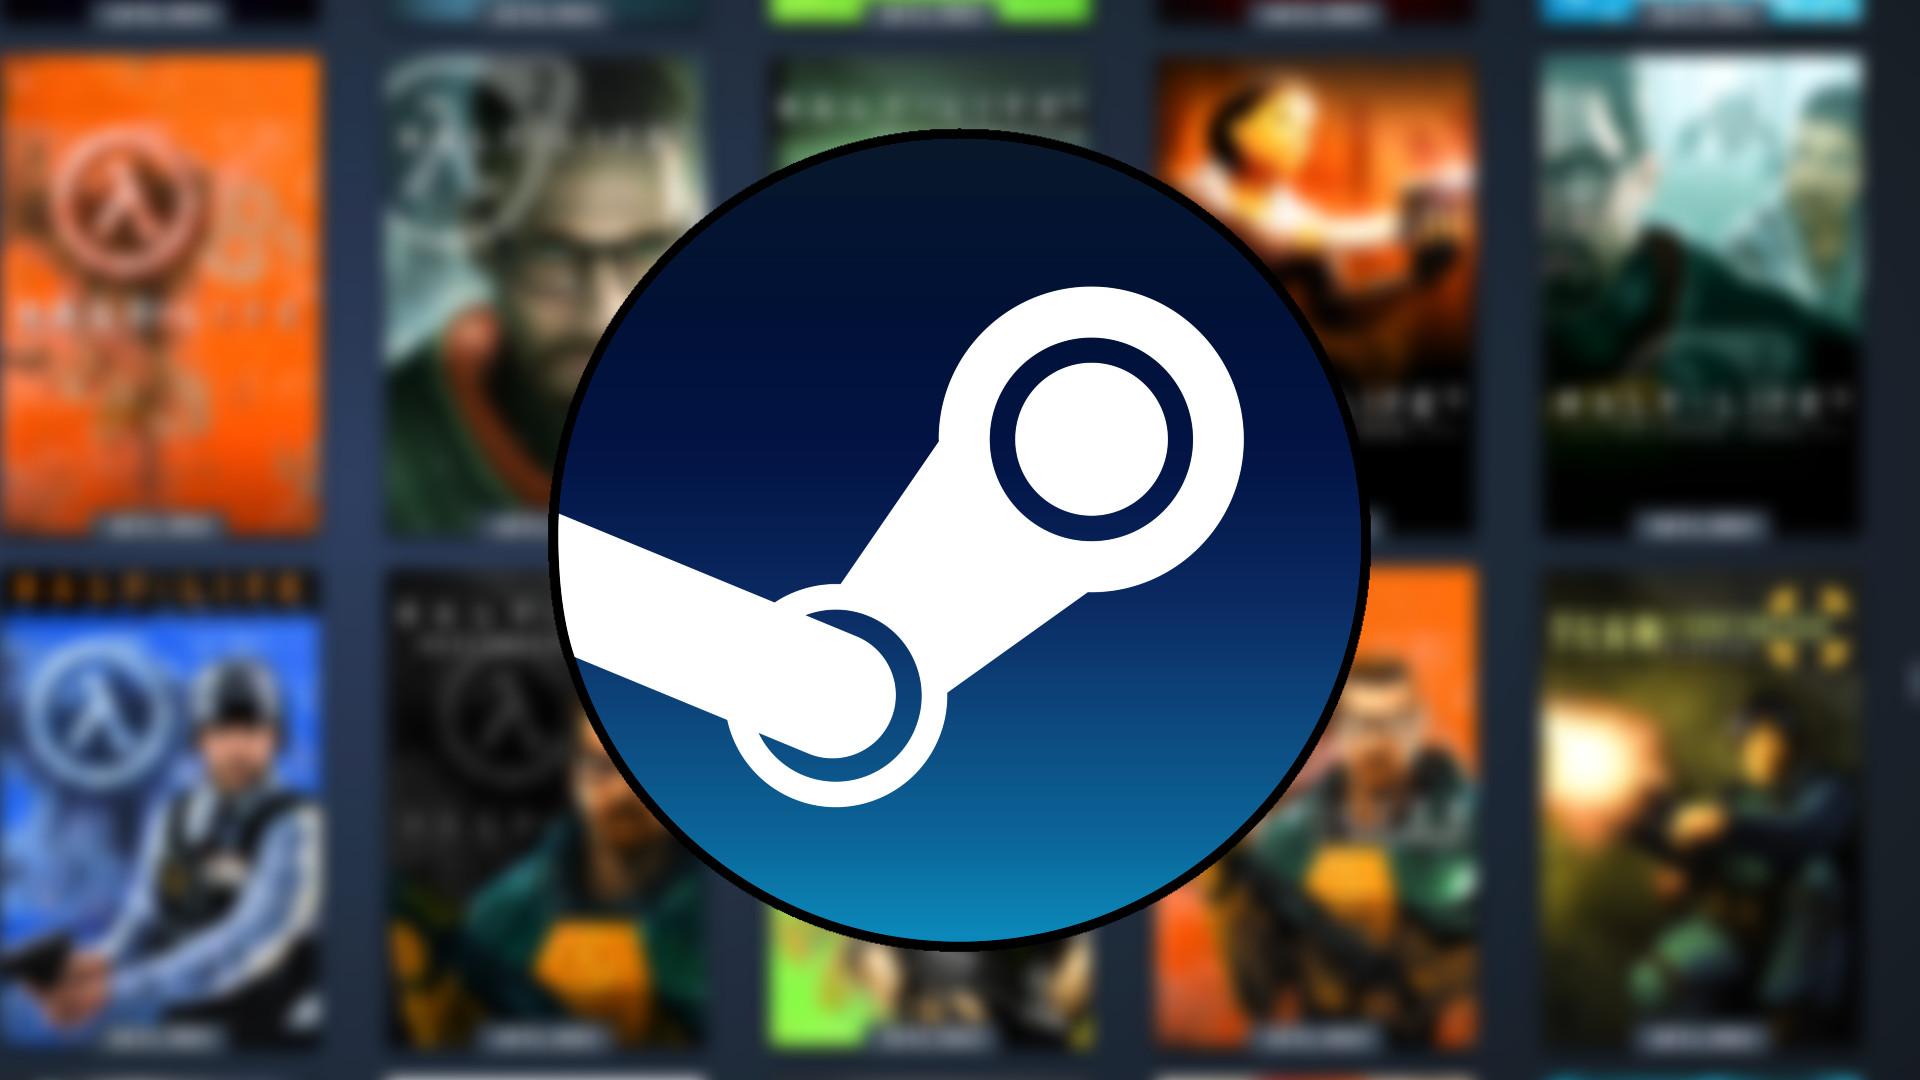 New Steam update from Valve lets you trace your entire backlog